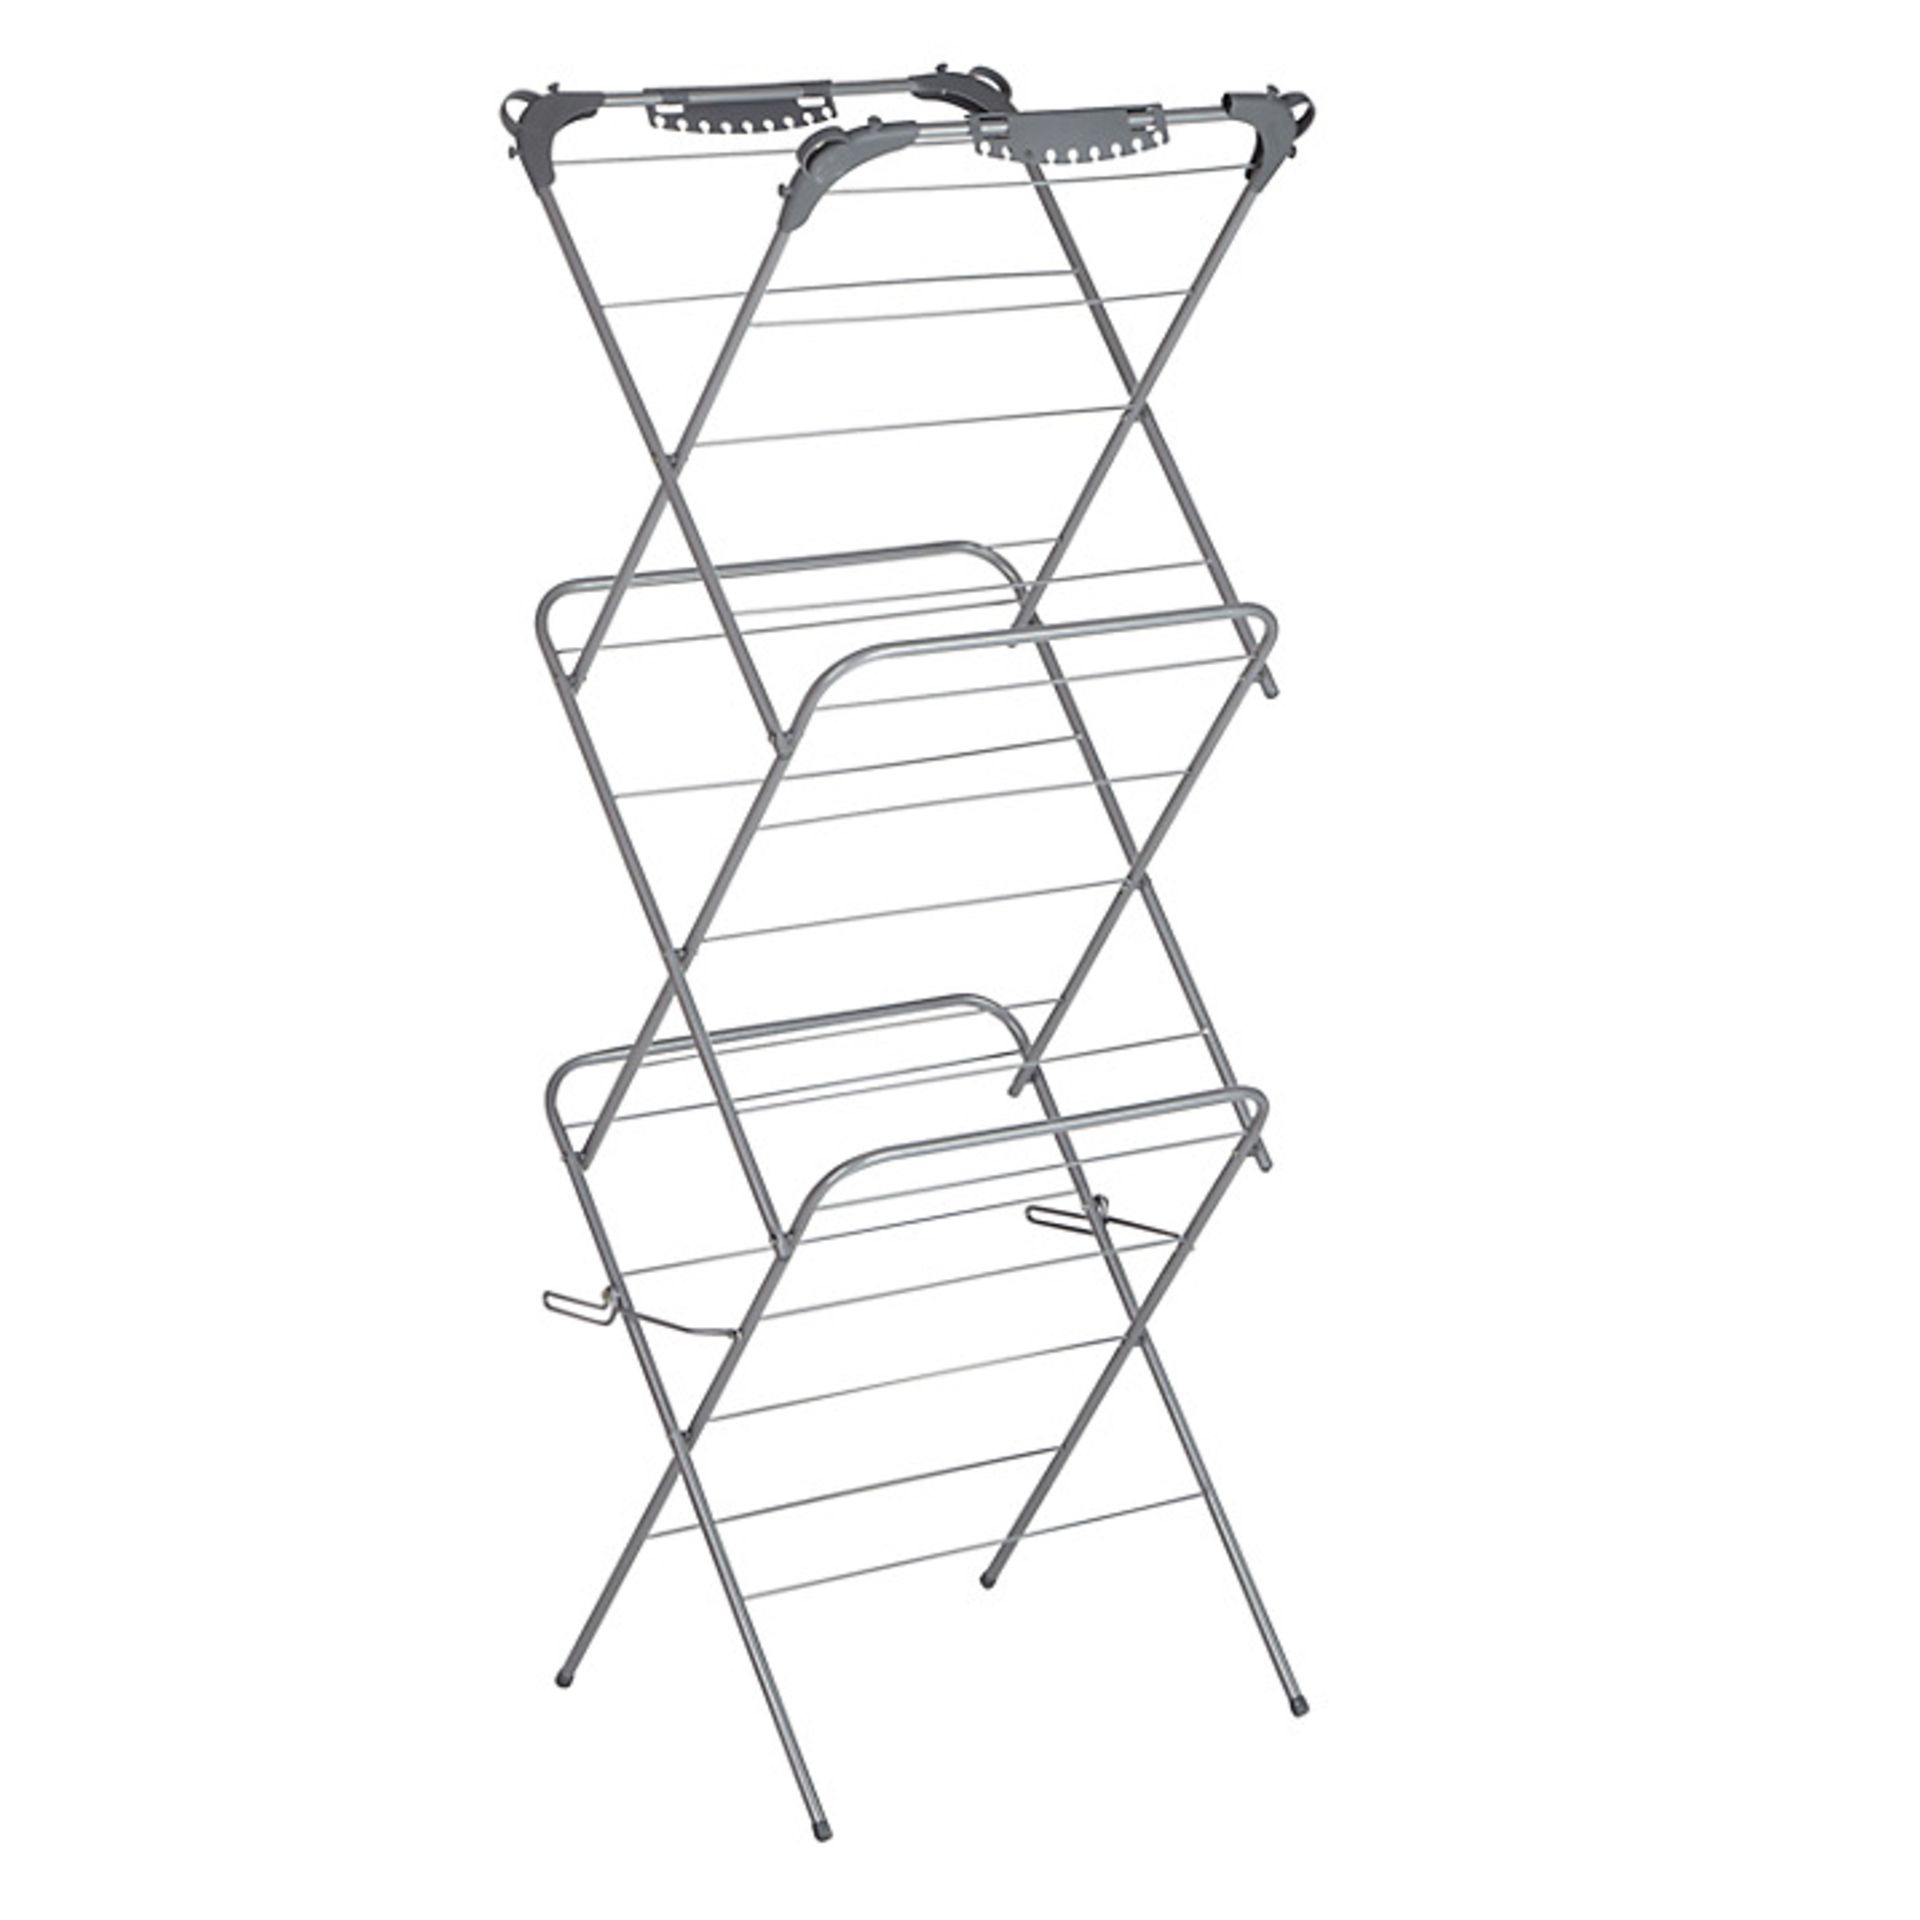 V Brand New Slimline 3 Tier Airer In Stainless Steel X 2 YOUR BID PRICE TO BE MULTIPLIED BY TWO